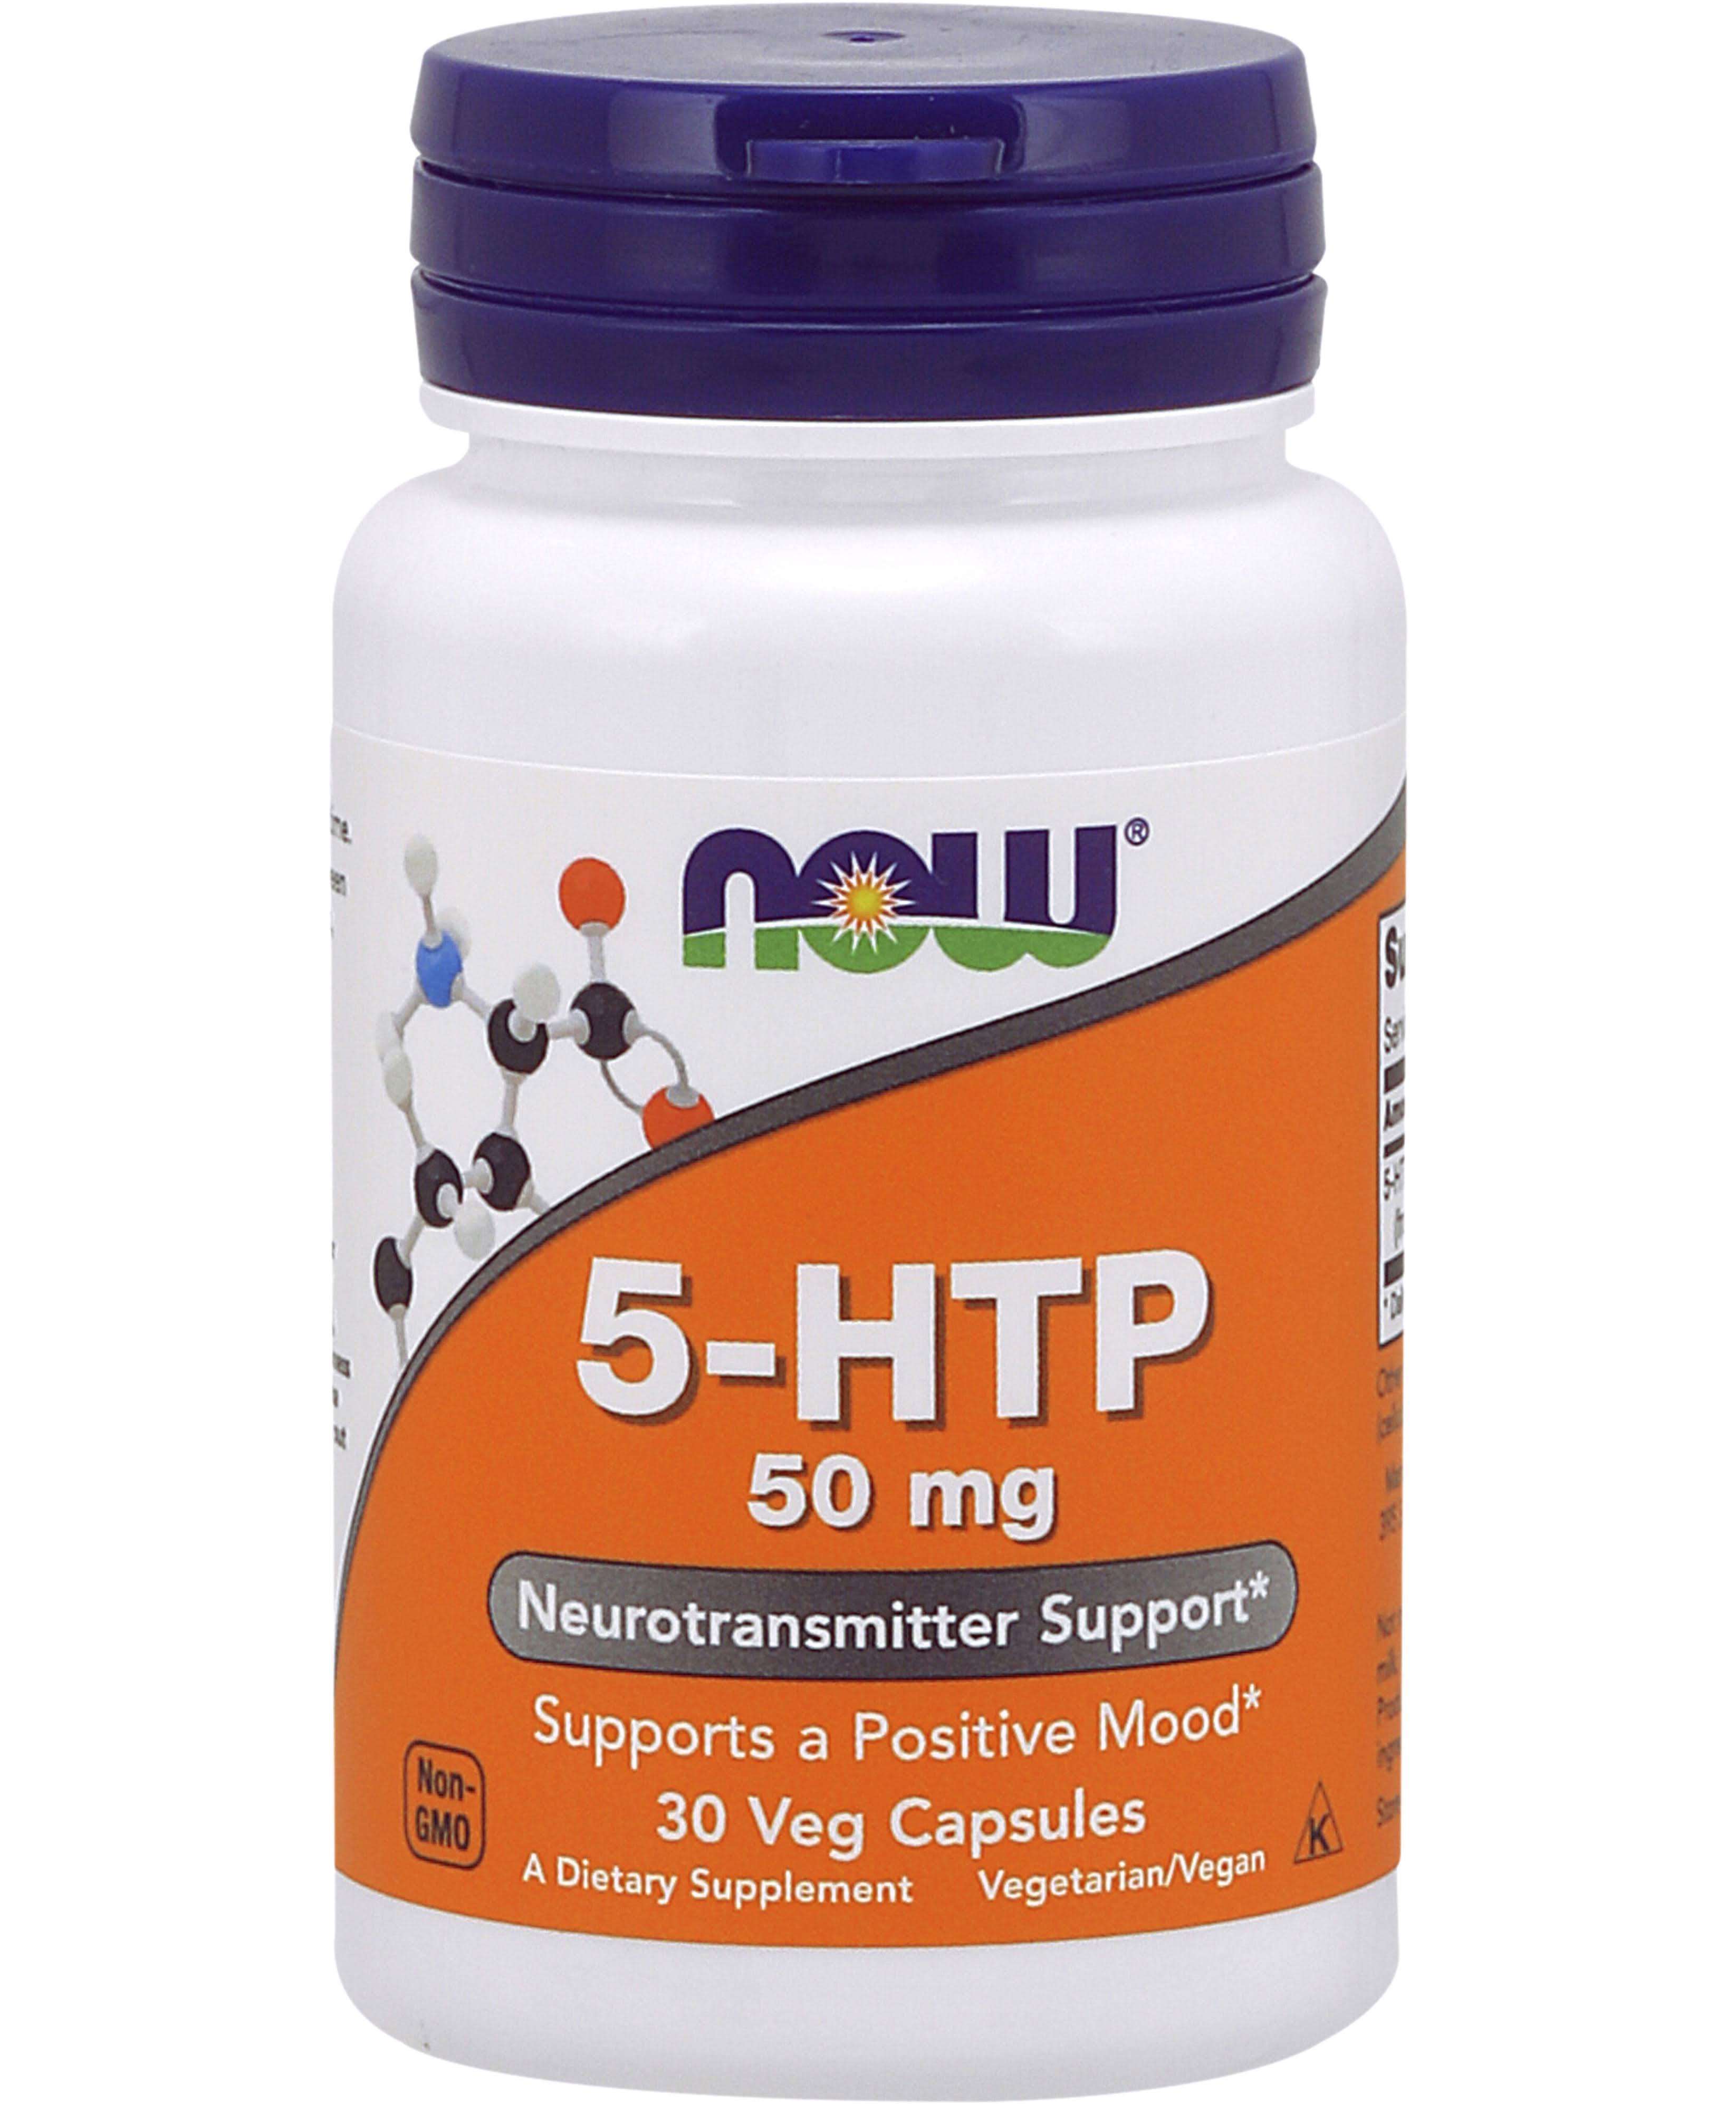 Now Foods 5-HTP 50mg Neurotransmitter Support - 30 Capsules